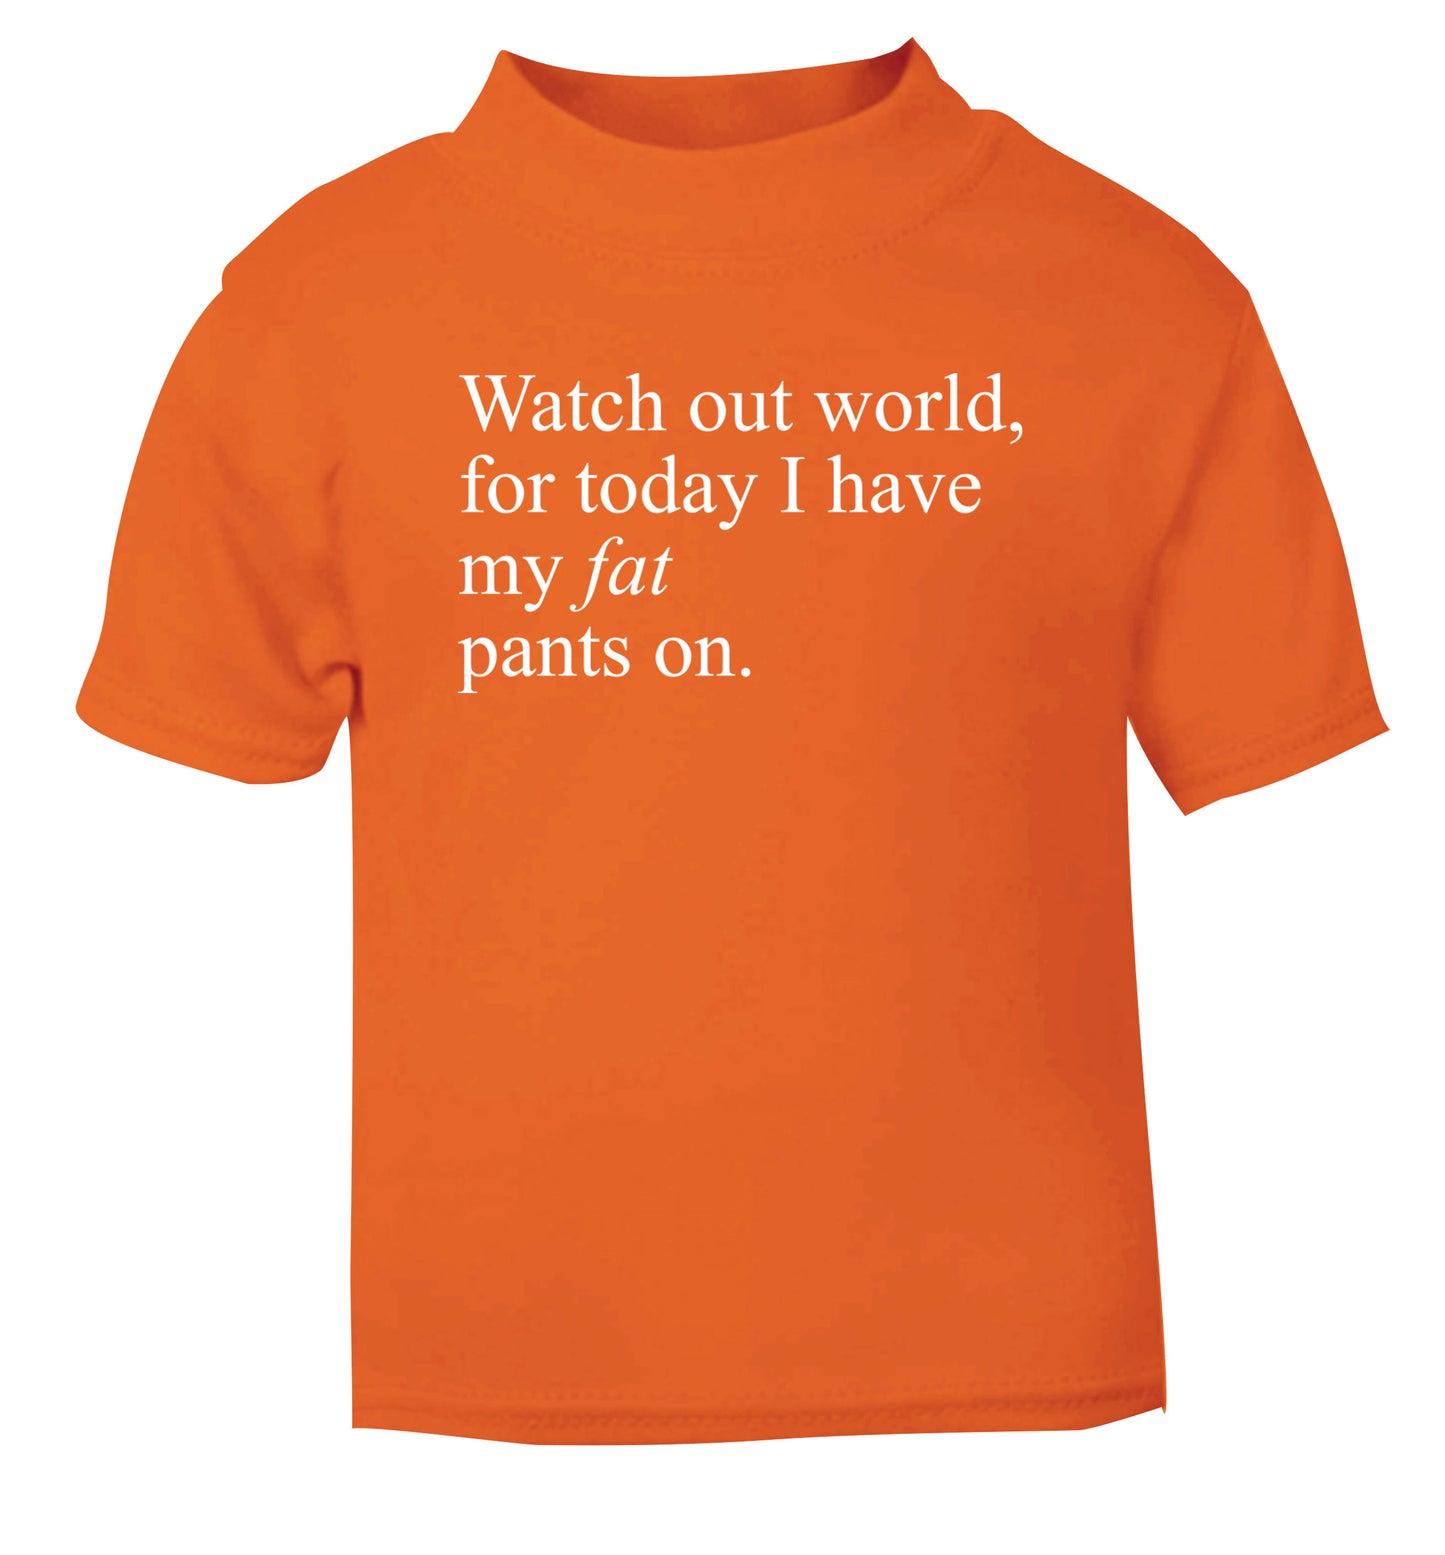 Watch out world, for today I have my fat pants on orange Baby Toddler Tshirt 2 Years